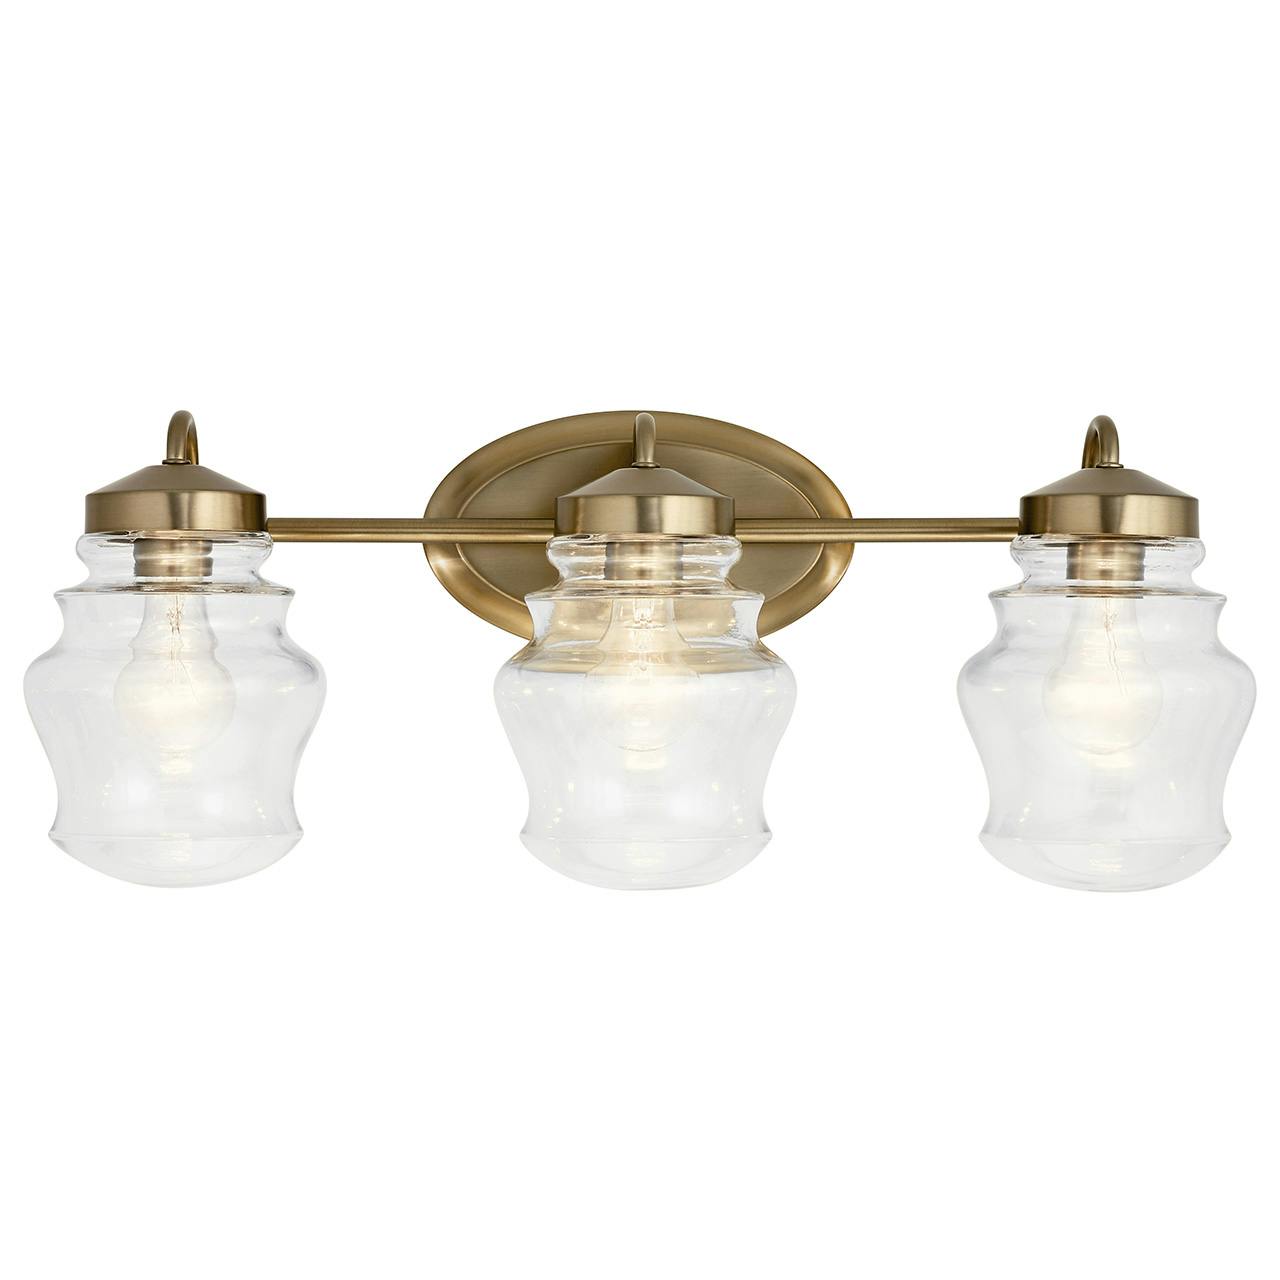 The Janiel 24" 3 Light Vanity Light Bronze facing down on a white background